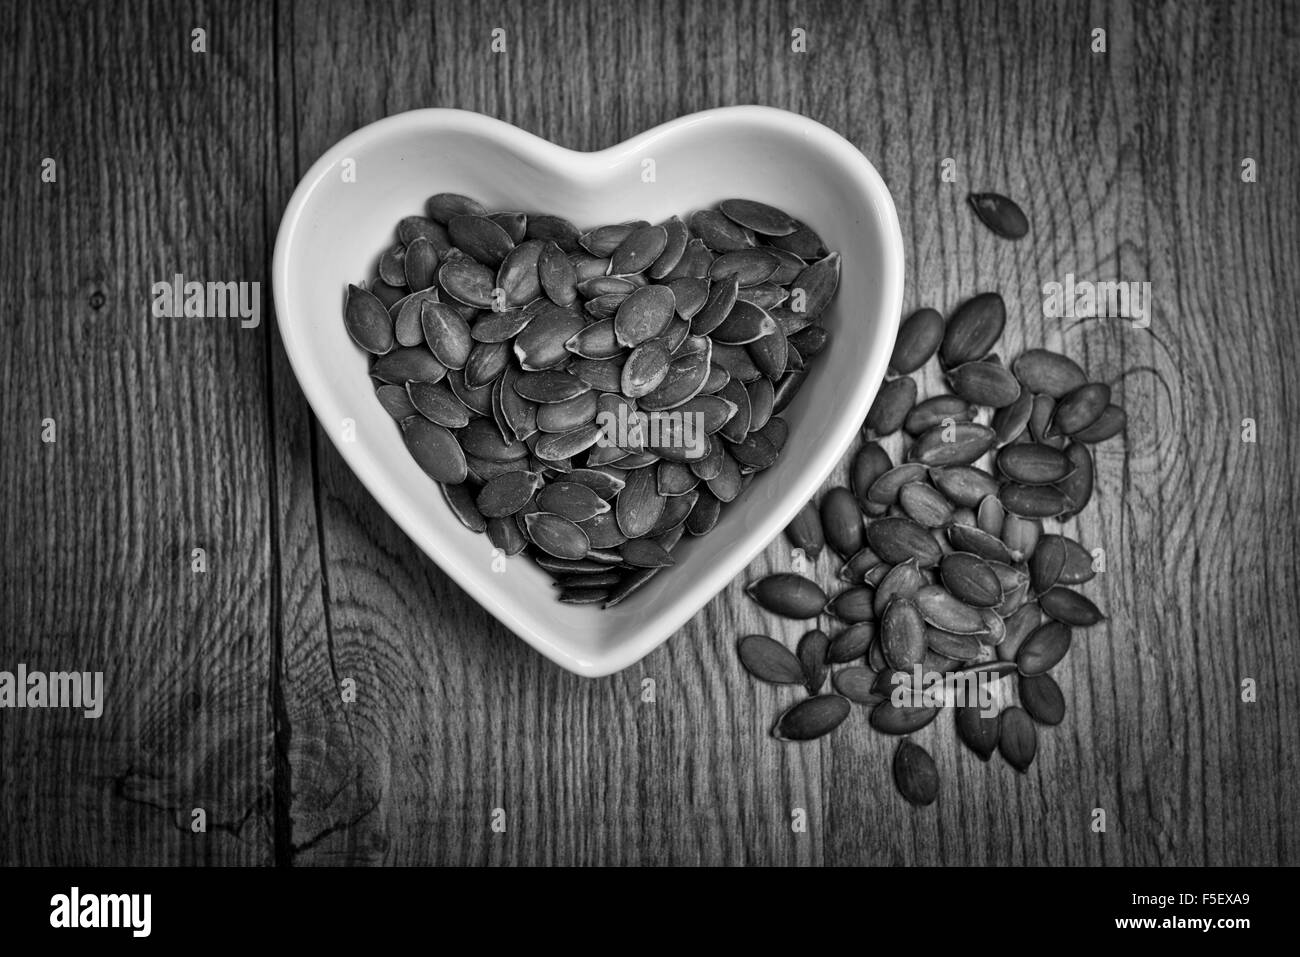 Pumpkin seeds in a heart shaped dish, black & white Stock Photo